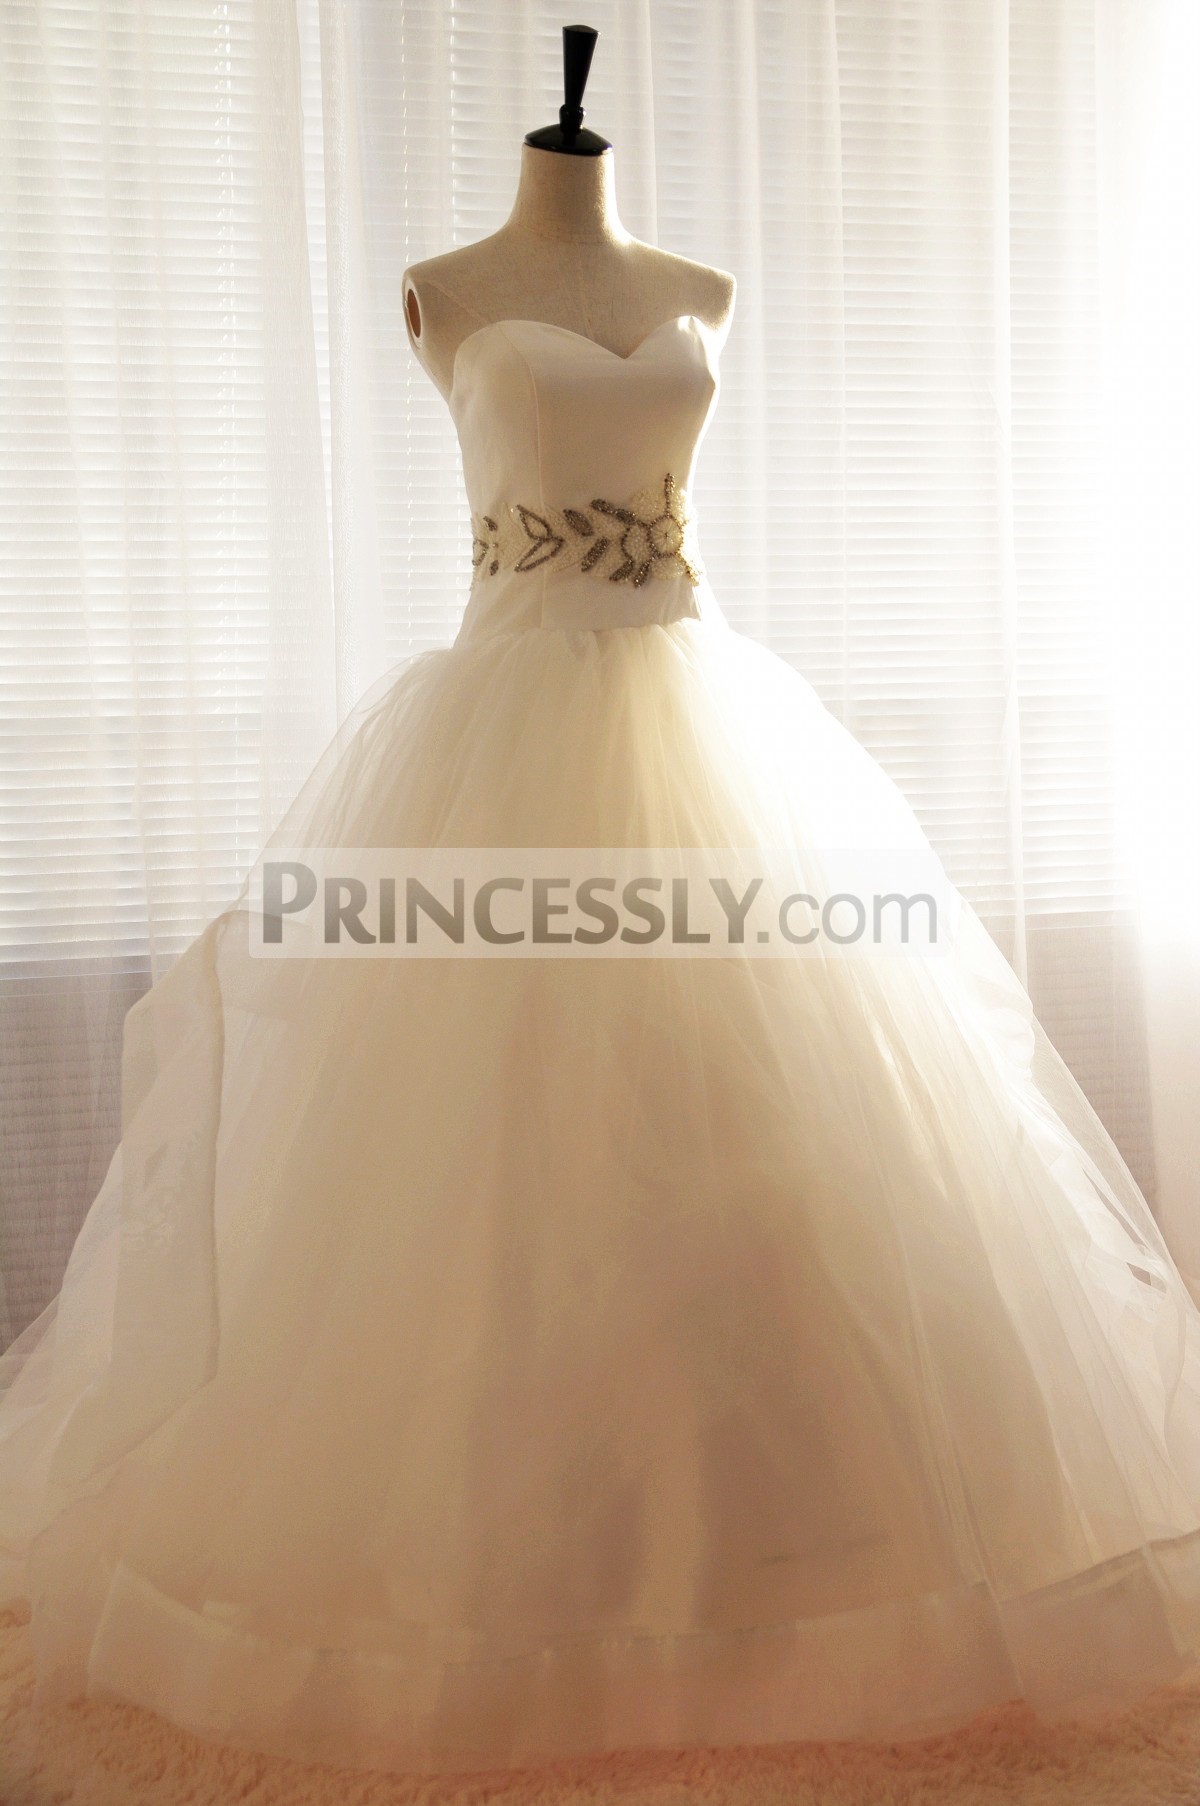 Princessly.com-K1000017-Strapless Sweetheart Tulle Ball Gown Wedding Dress with Beaded Waist-31